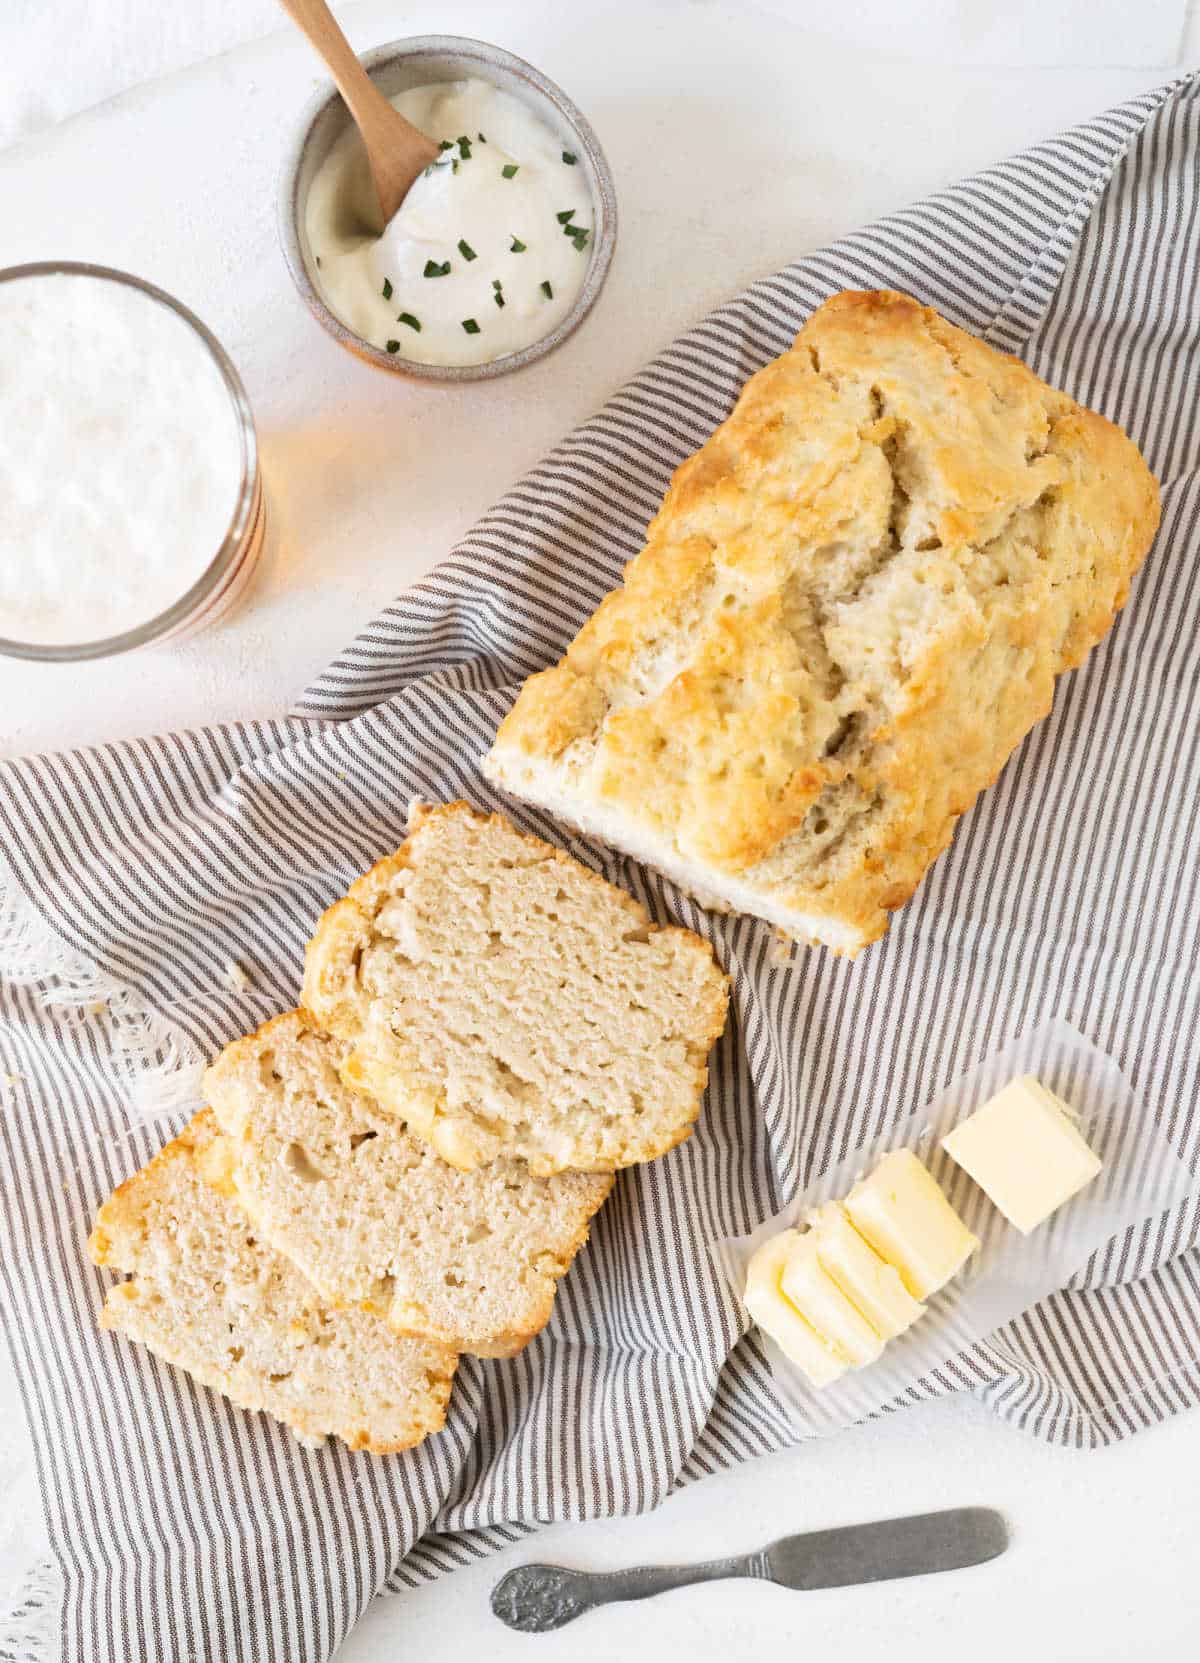 Beer bread with slices on a striped towel, butter slices, small bowls. White marble surface.